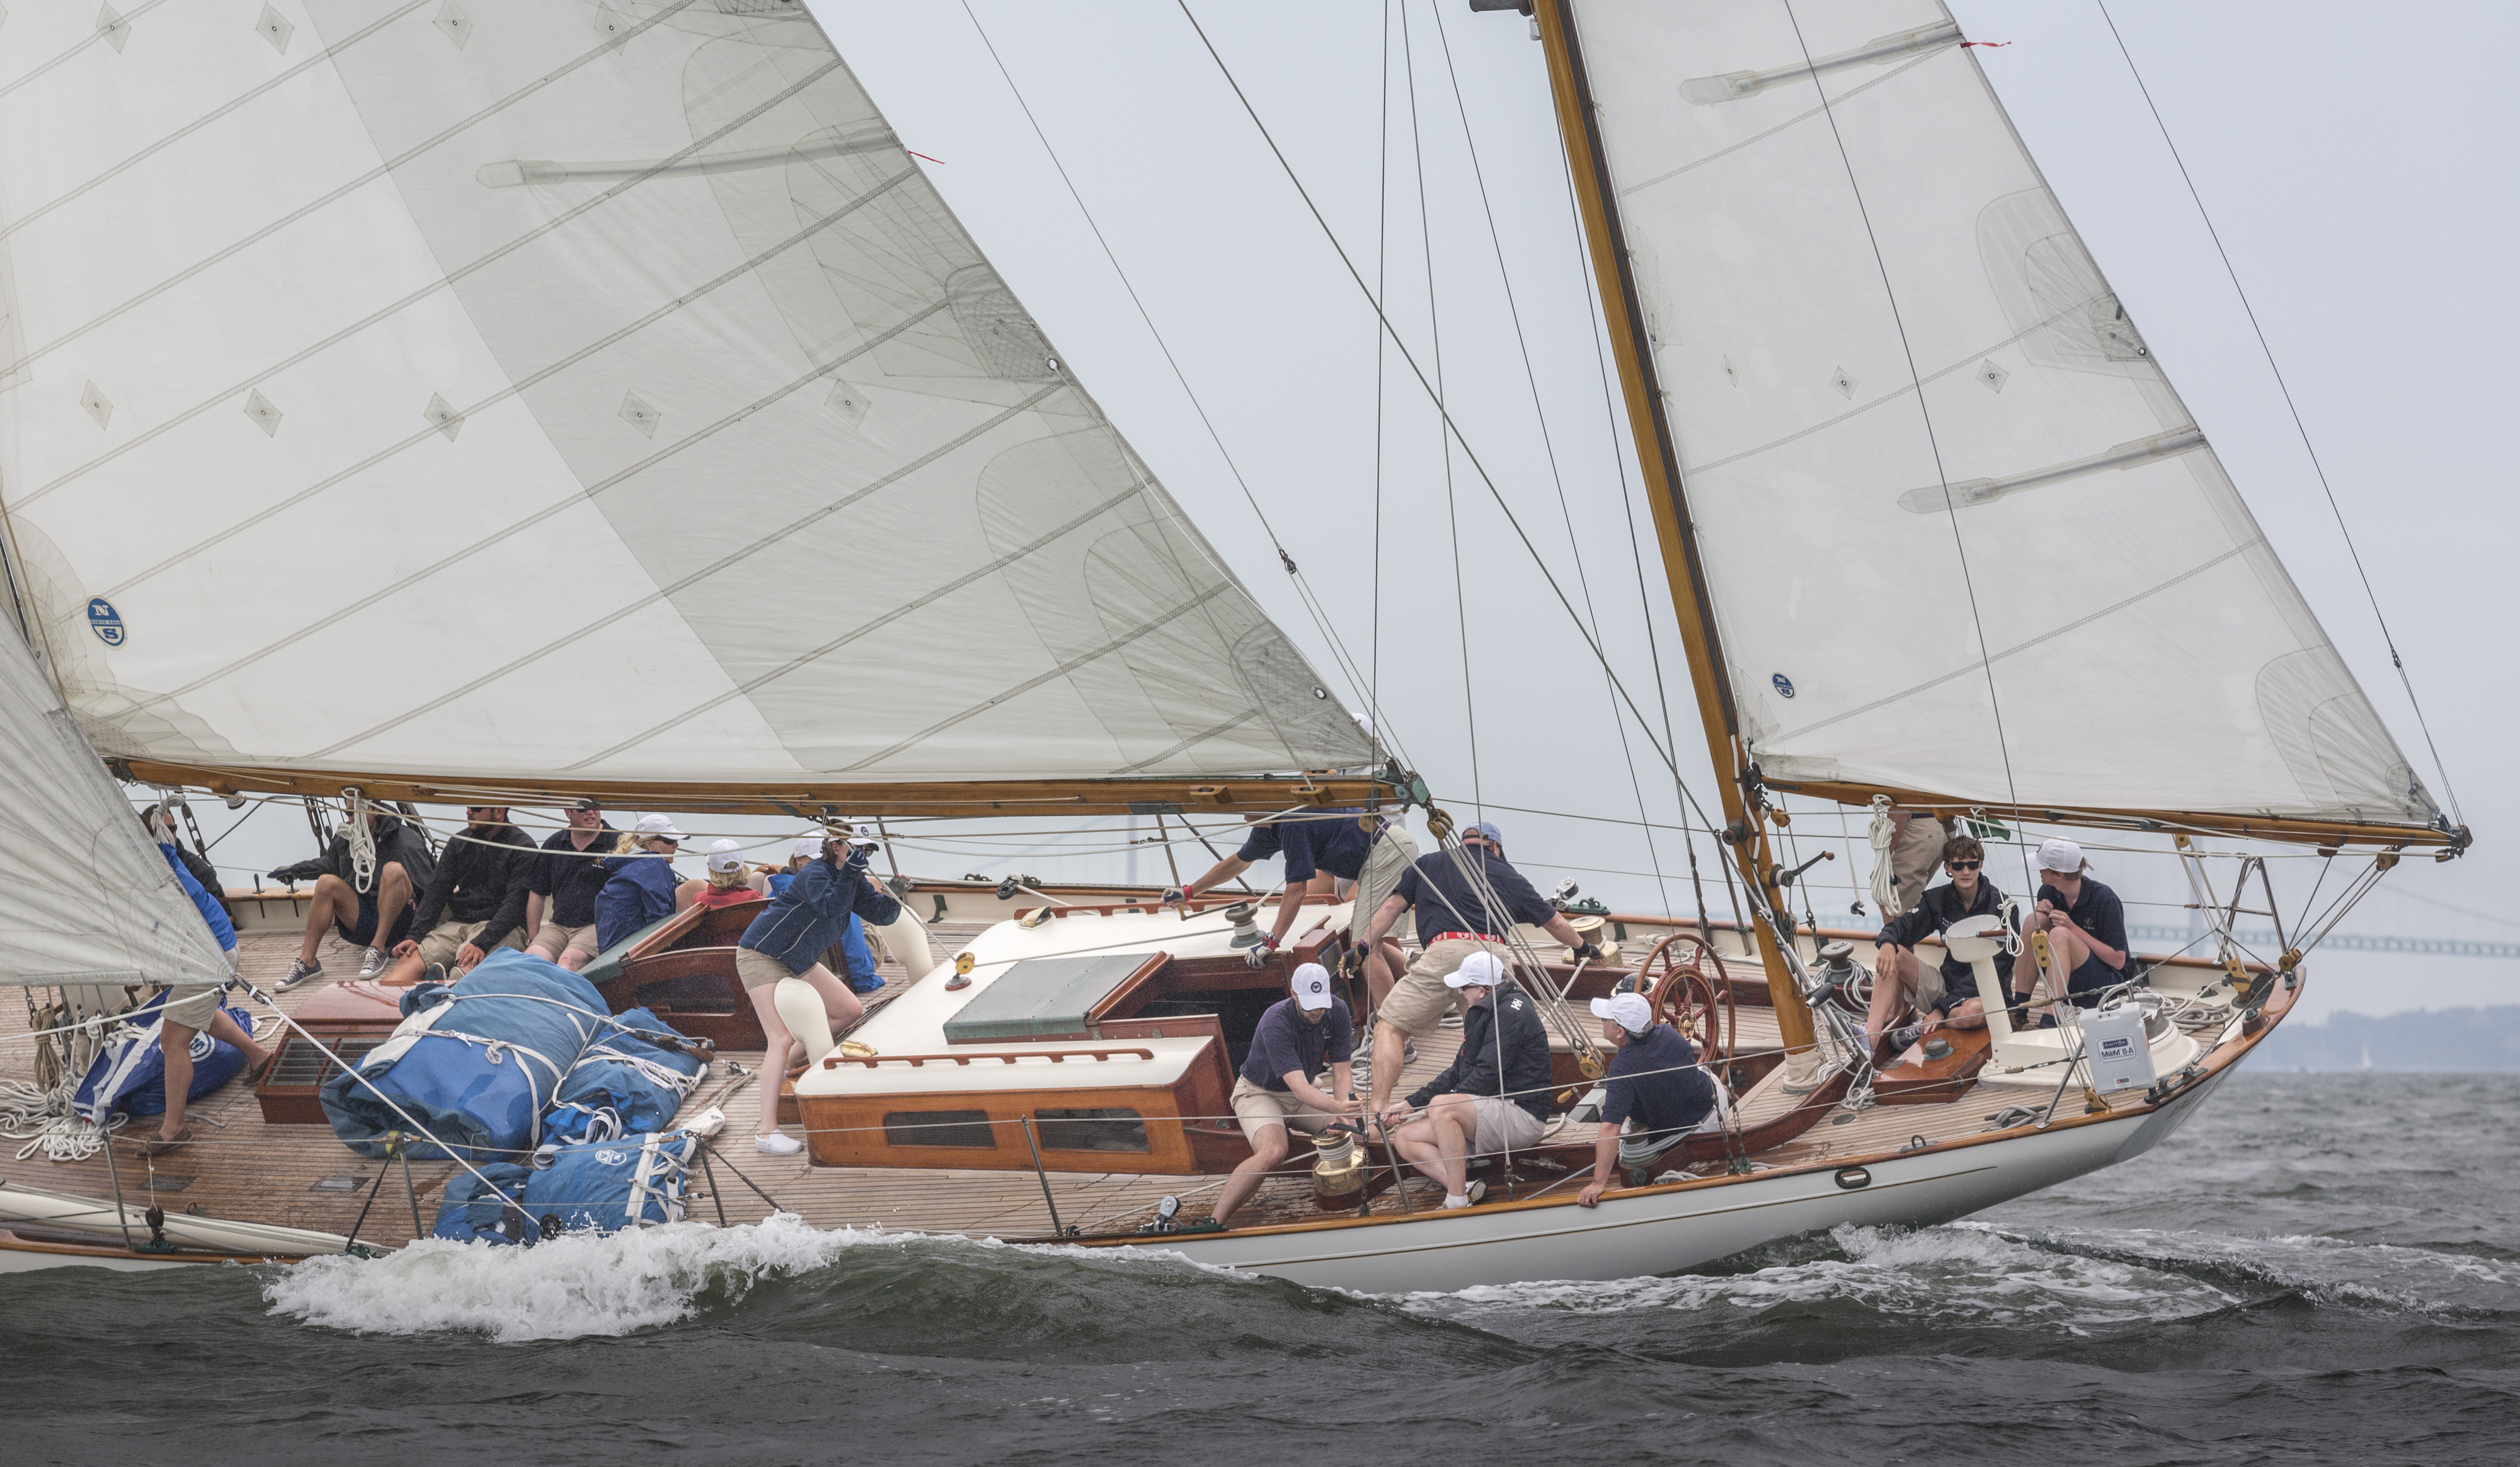 New York Yacht Club Race Week at Newport presented by Rolex 2014